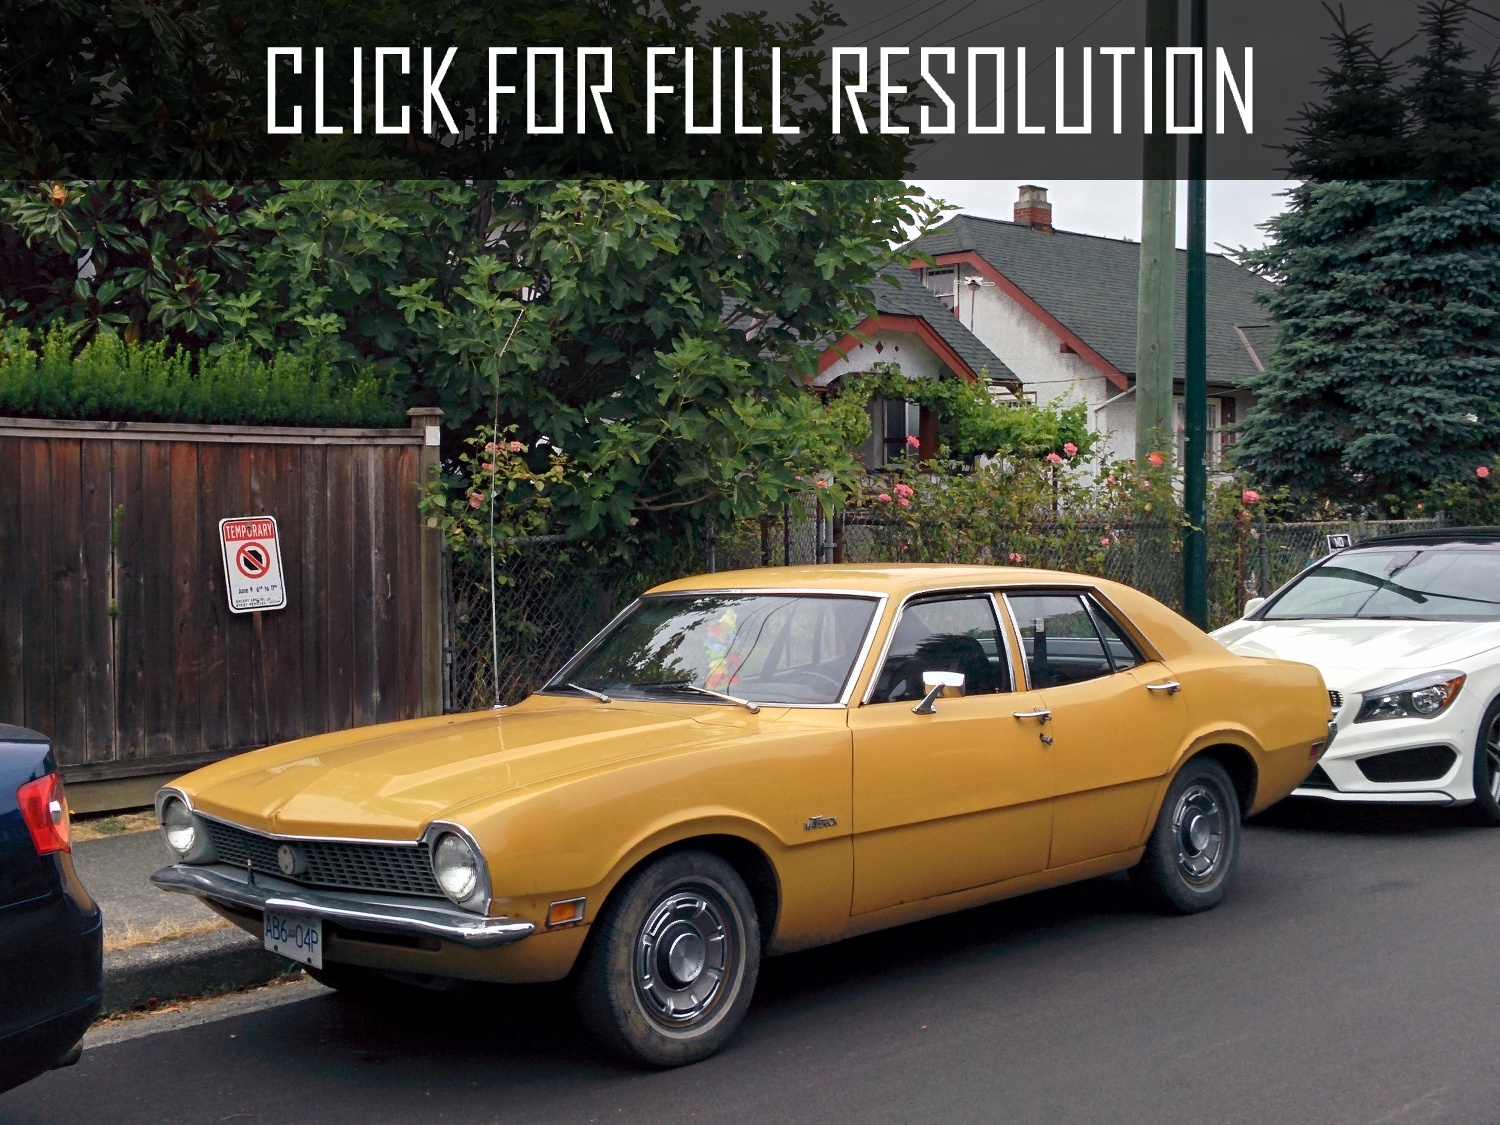 Ford Maverick 4 Door - amazing photo gallery, some information and